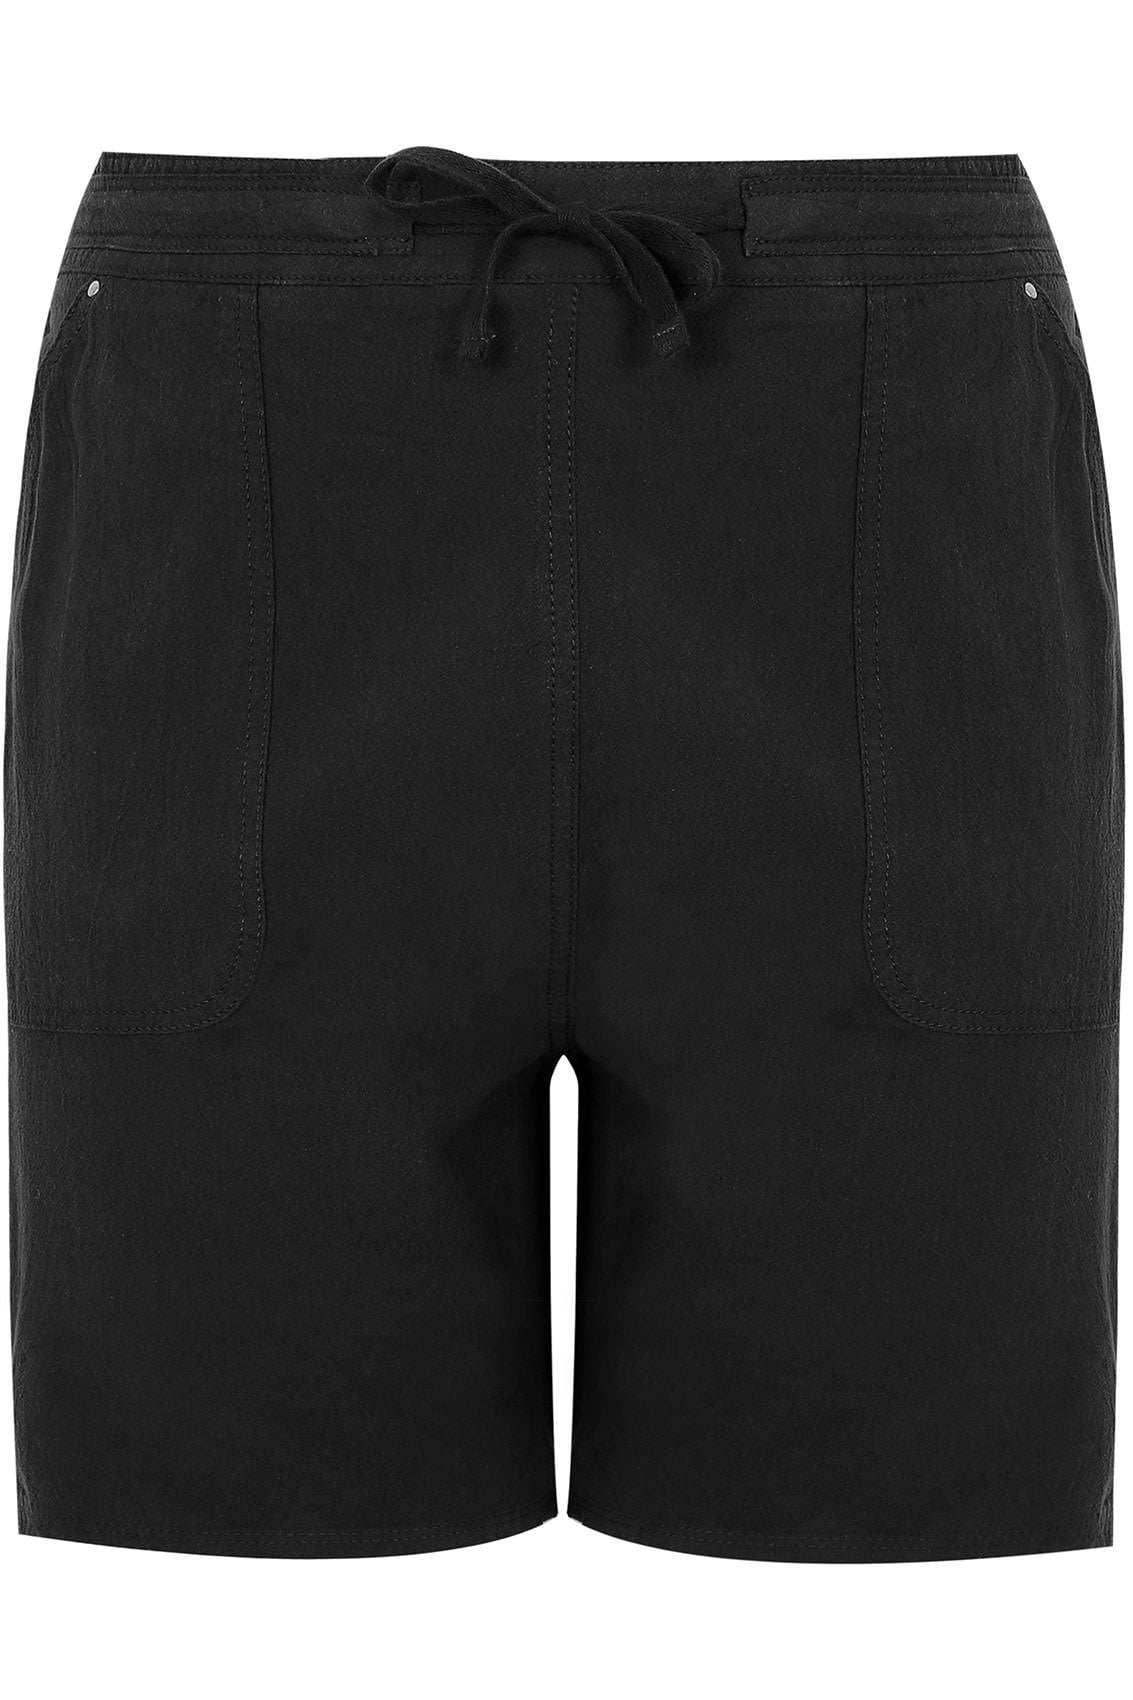 Black Cool Cotton Pull On Shorts, Plus size 16 to 36